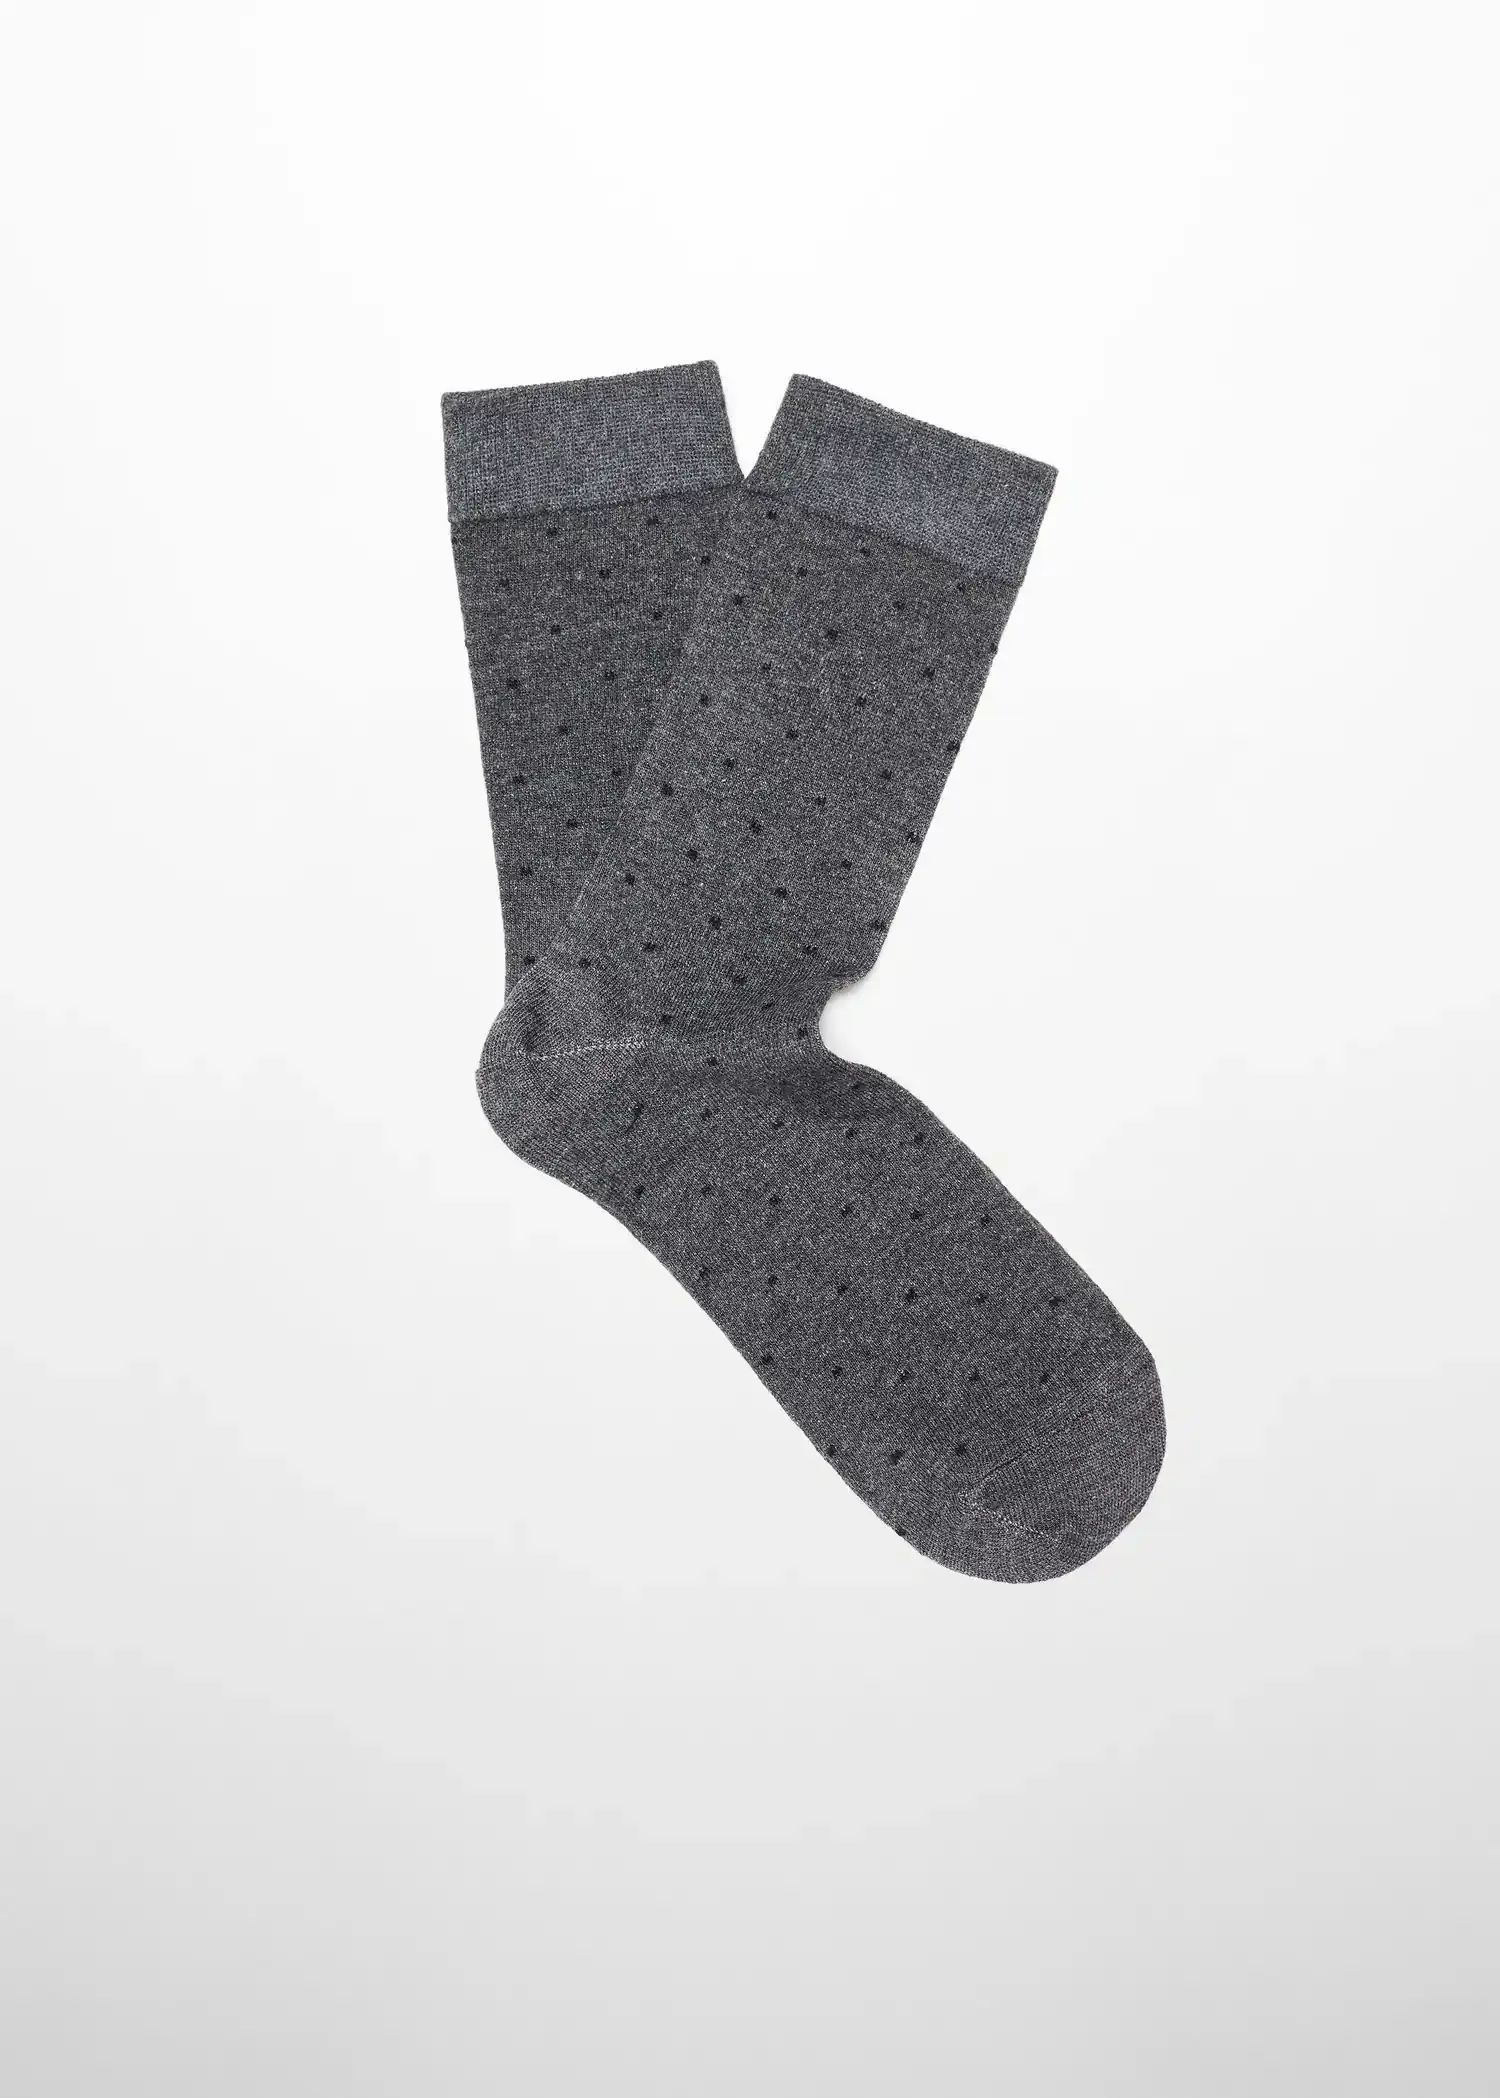 Mango Cotton socks with embroidered detail. 1